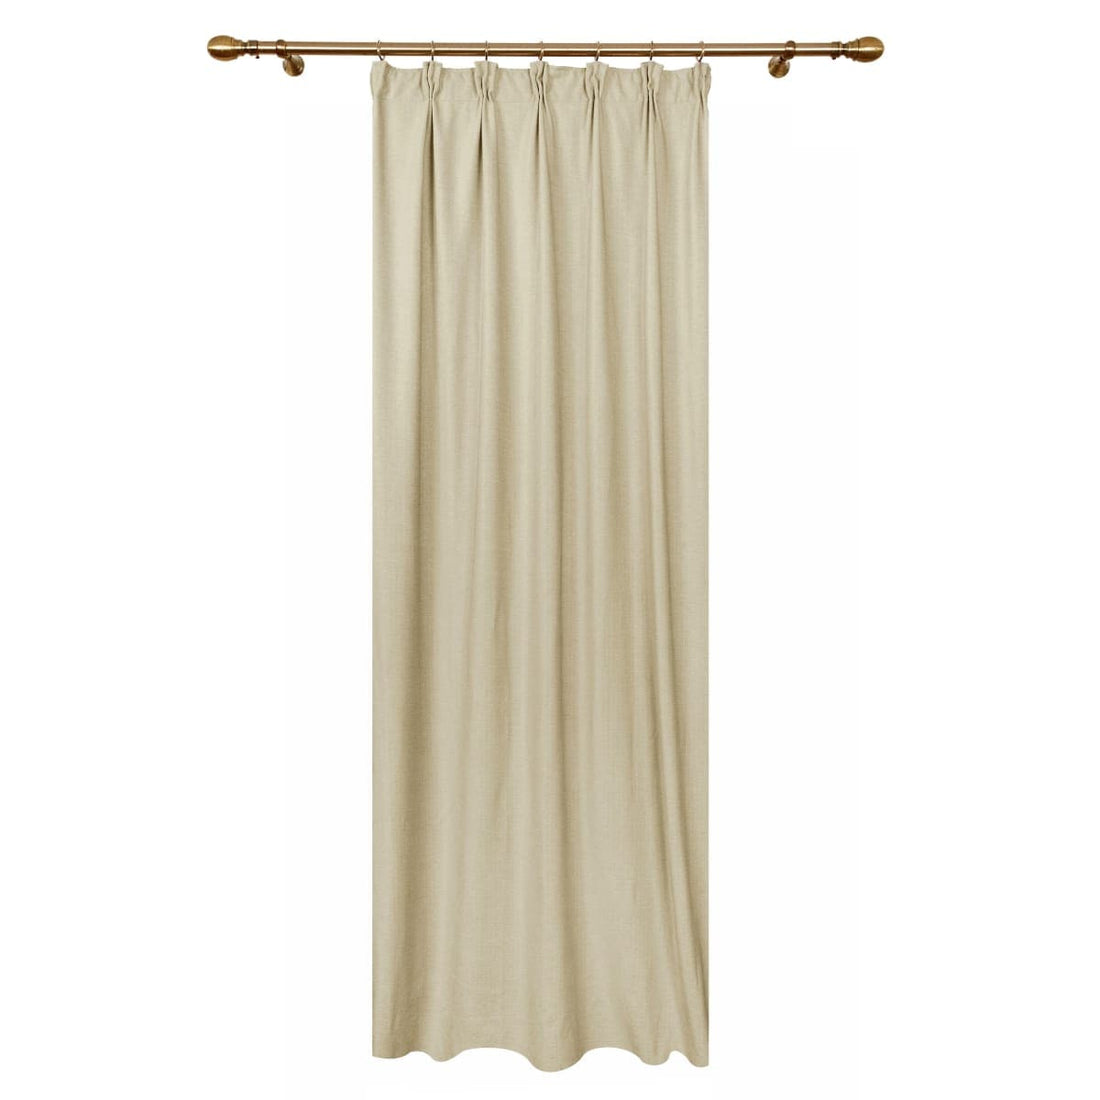 CAROL MOON OPAQUE CURTAIN 200X280 CM WEBBING AND CONCEALED HANGING LOOP - best price from Maltashopper.com BR480009482